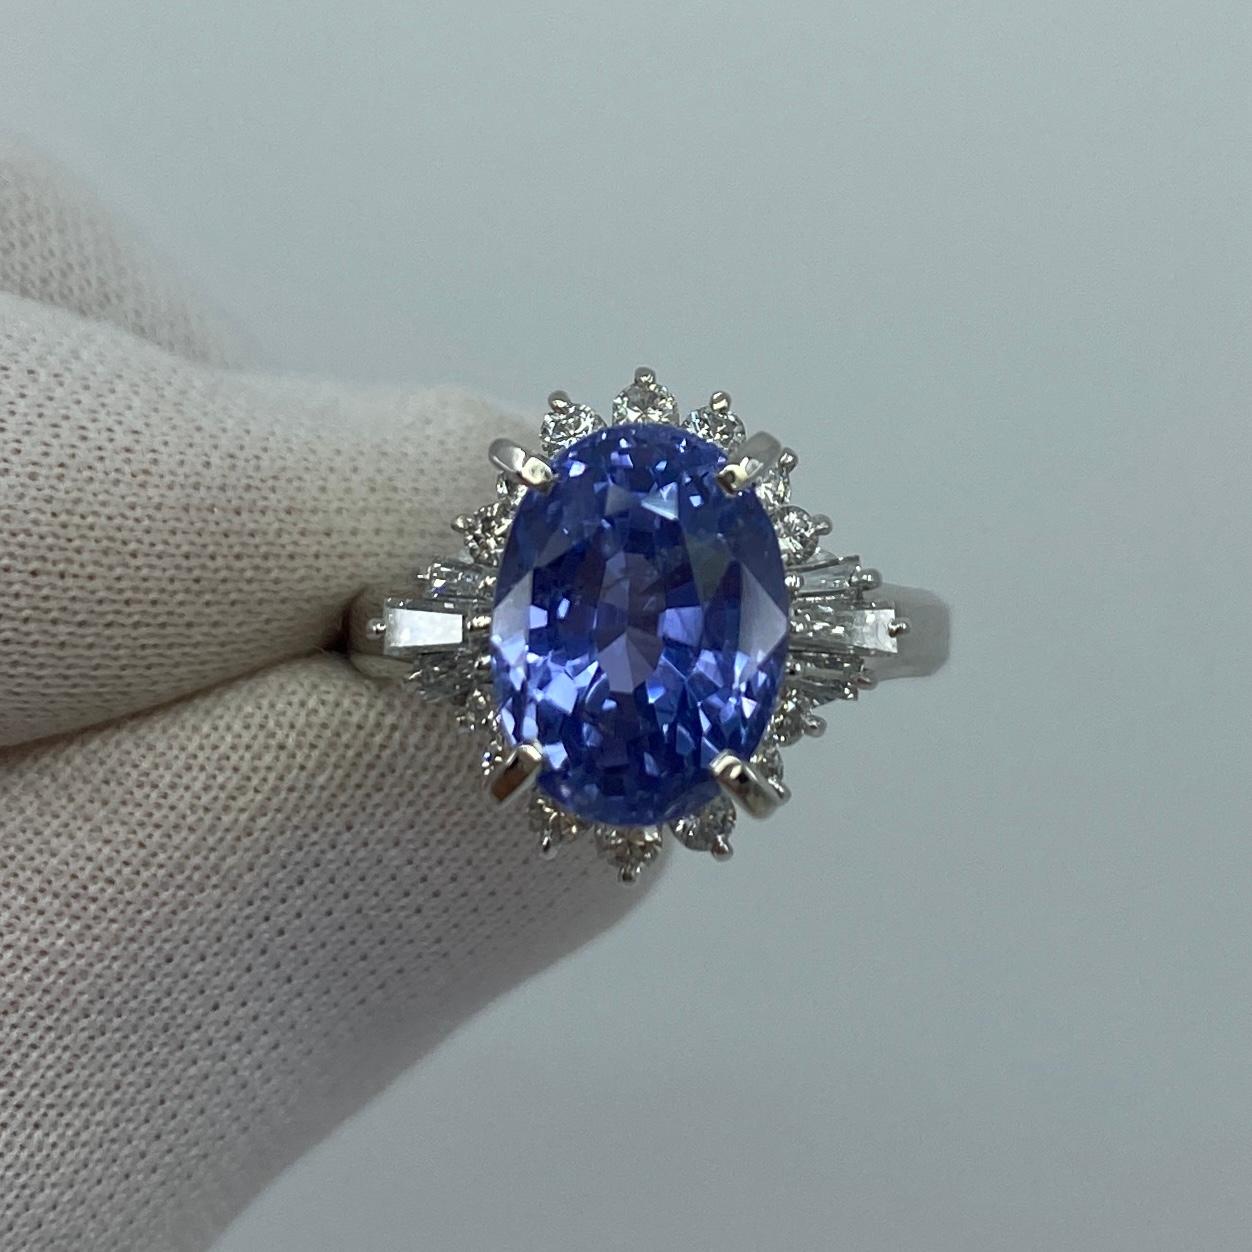 GIA Certified 7.08 Carat Untreated Color Change Sapphire & Diamond Cocktail Ring For Sale 2